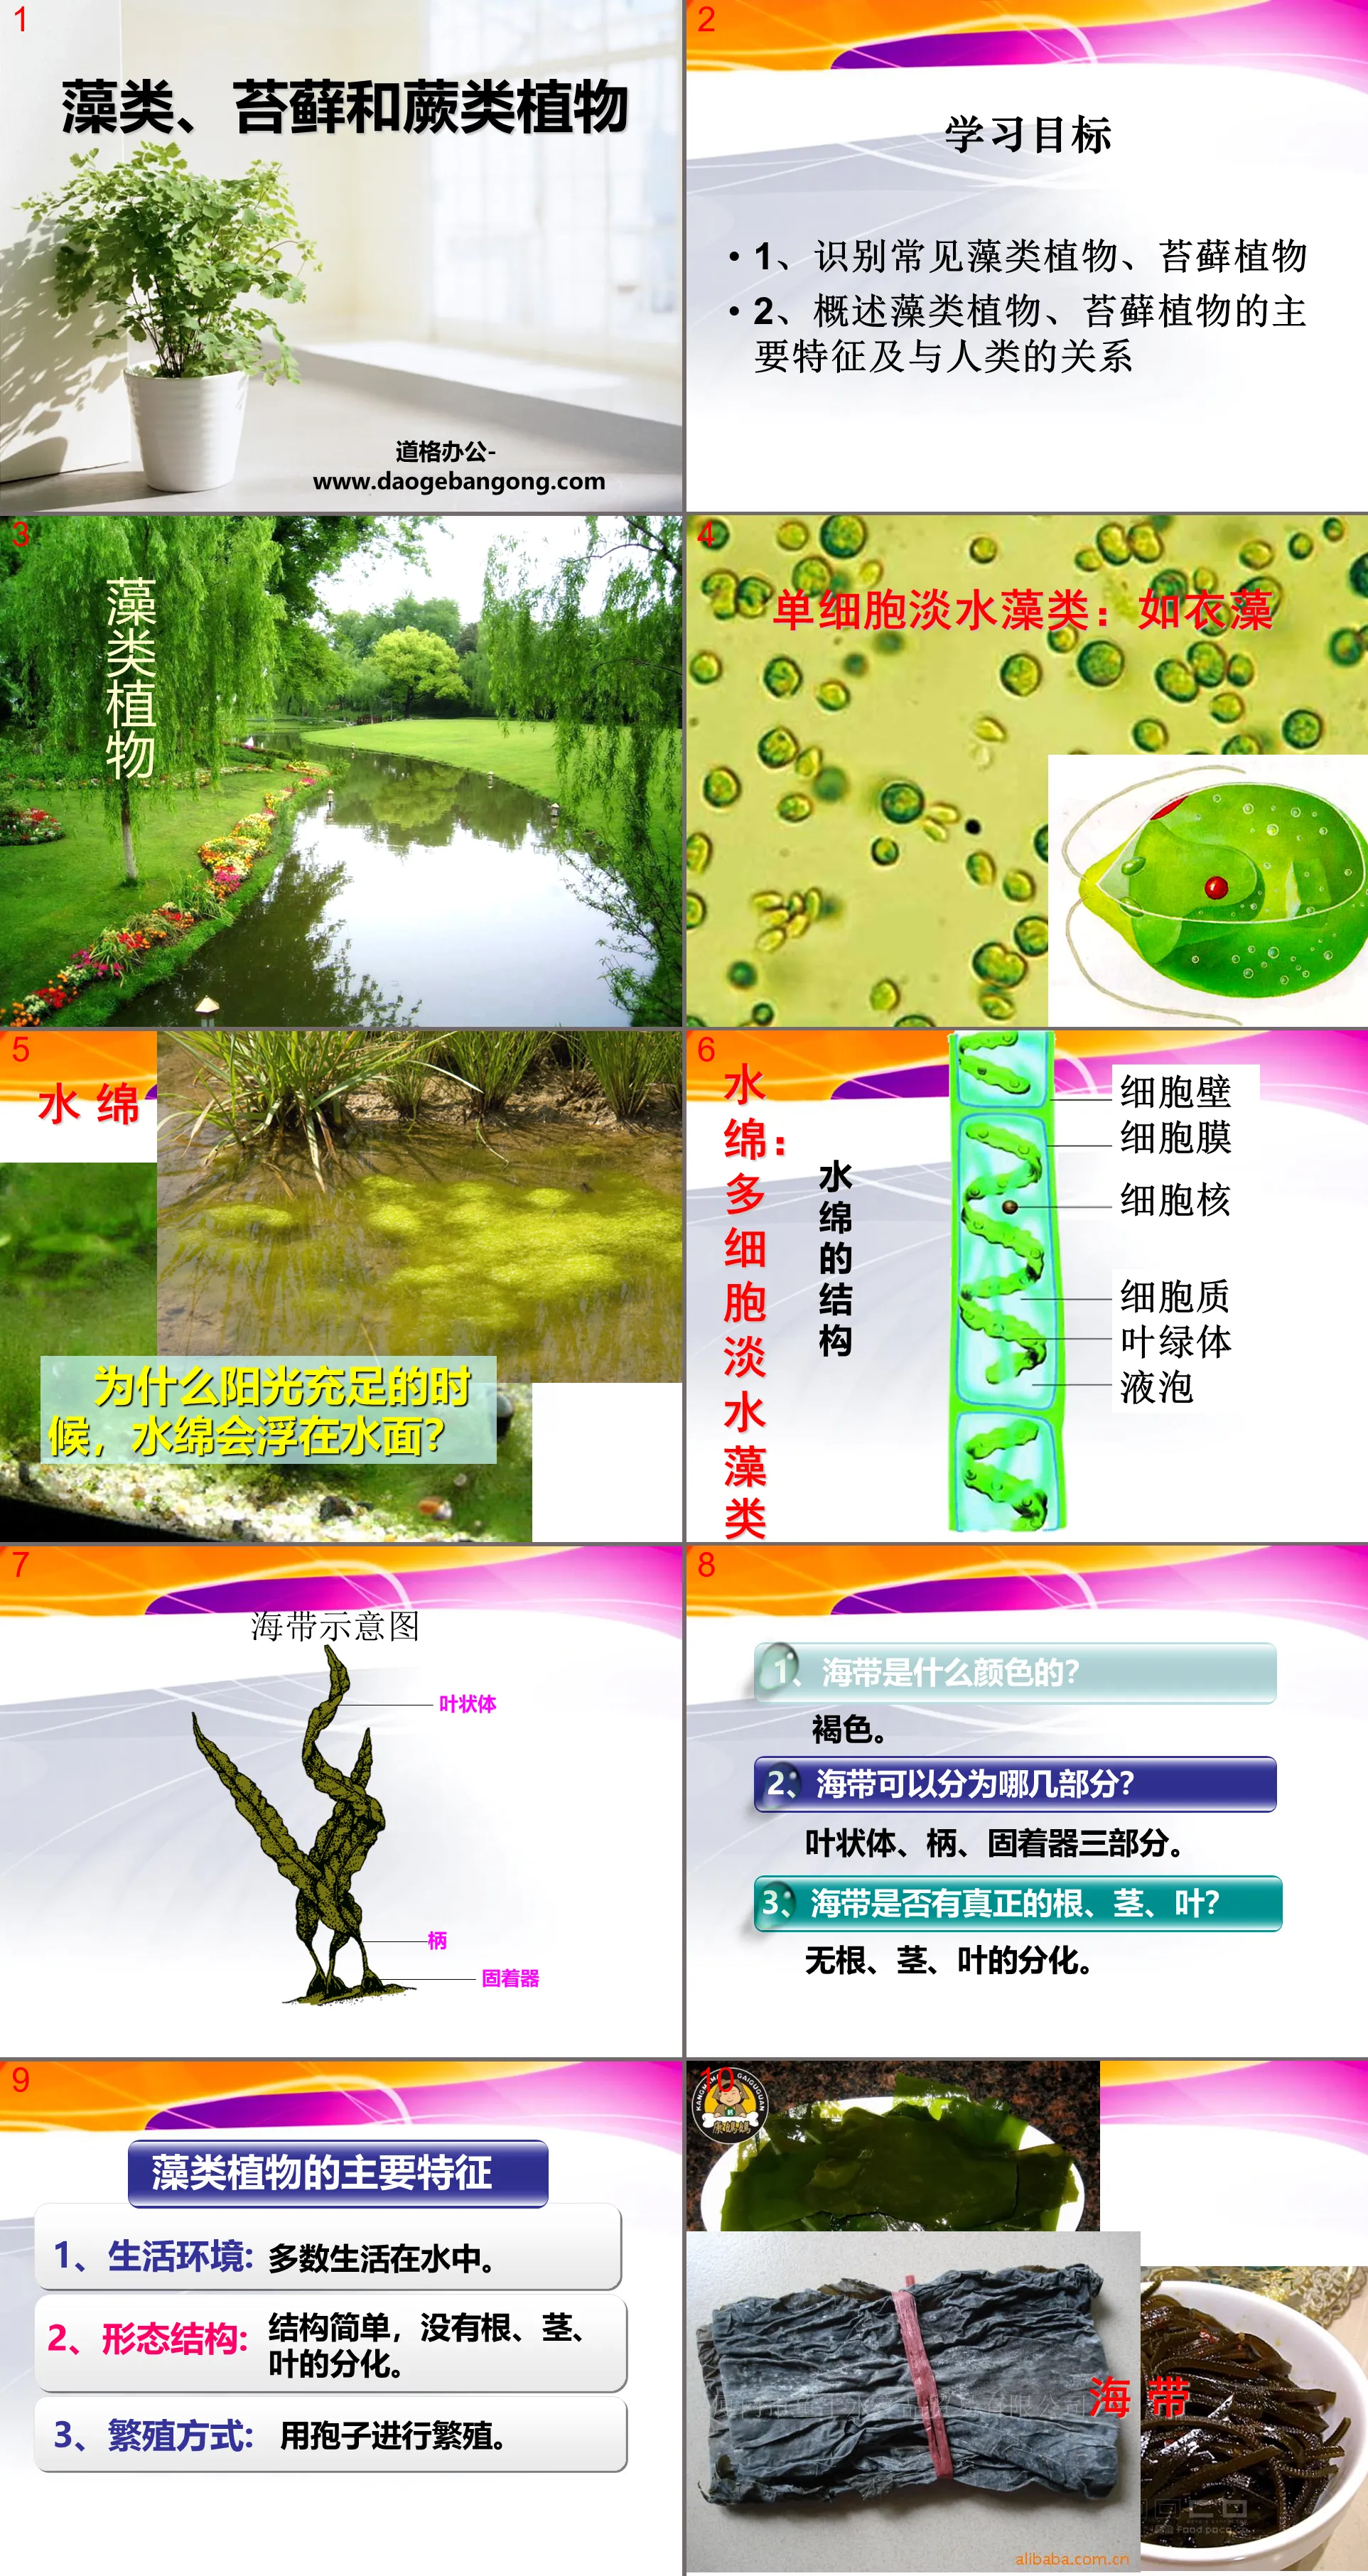 "Algae, Moss and Ferns" What are the green plants in the biosphere PPT courseware